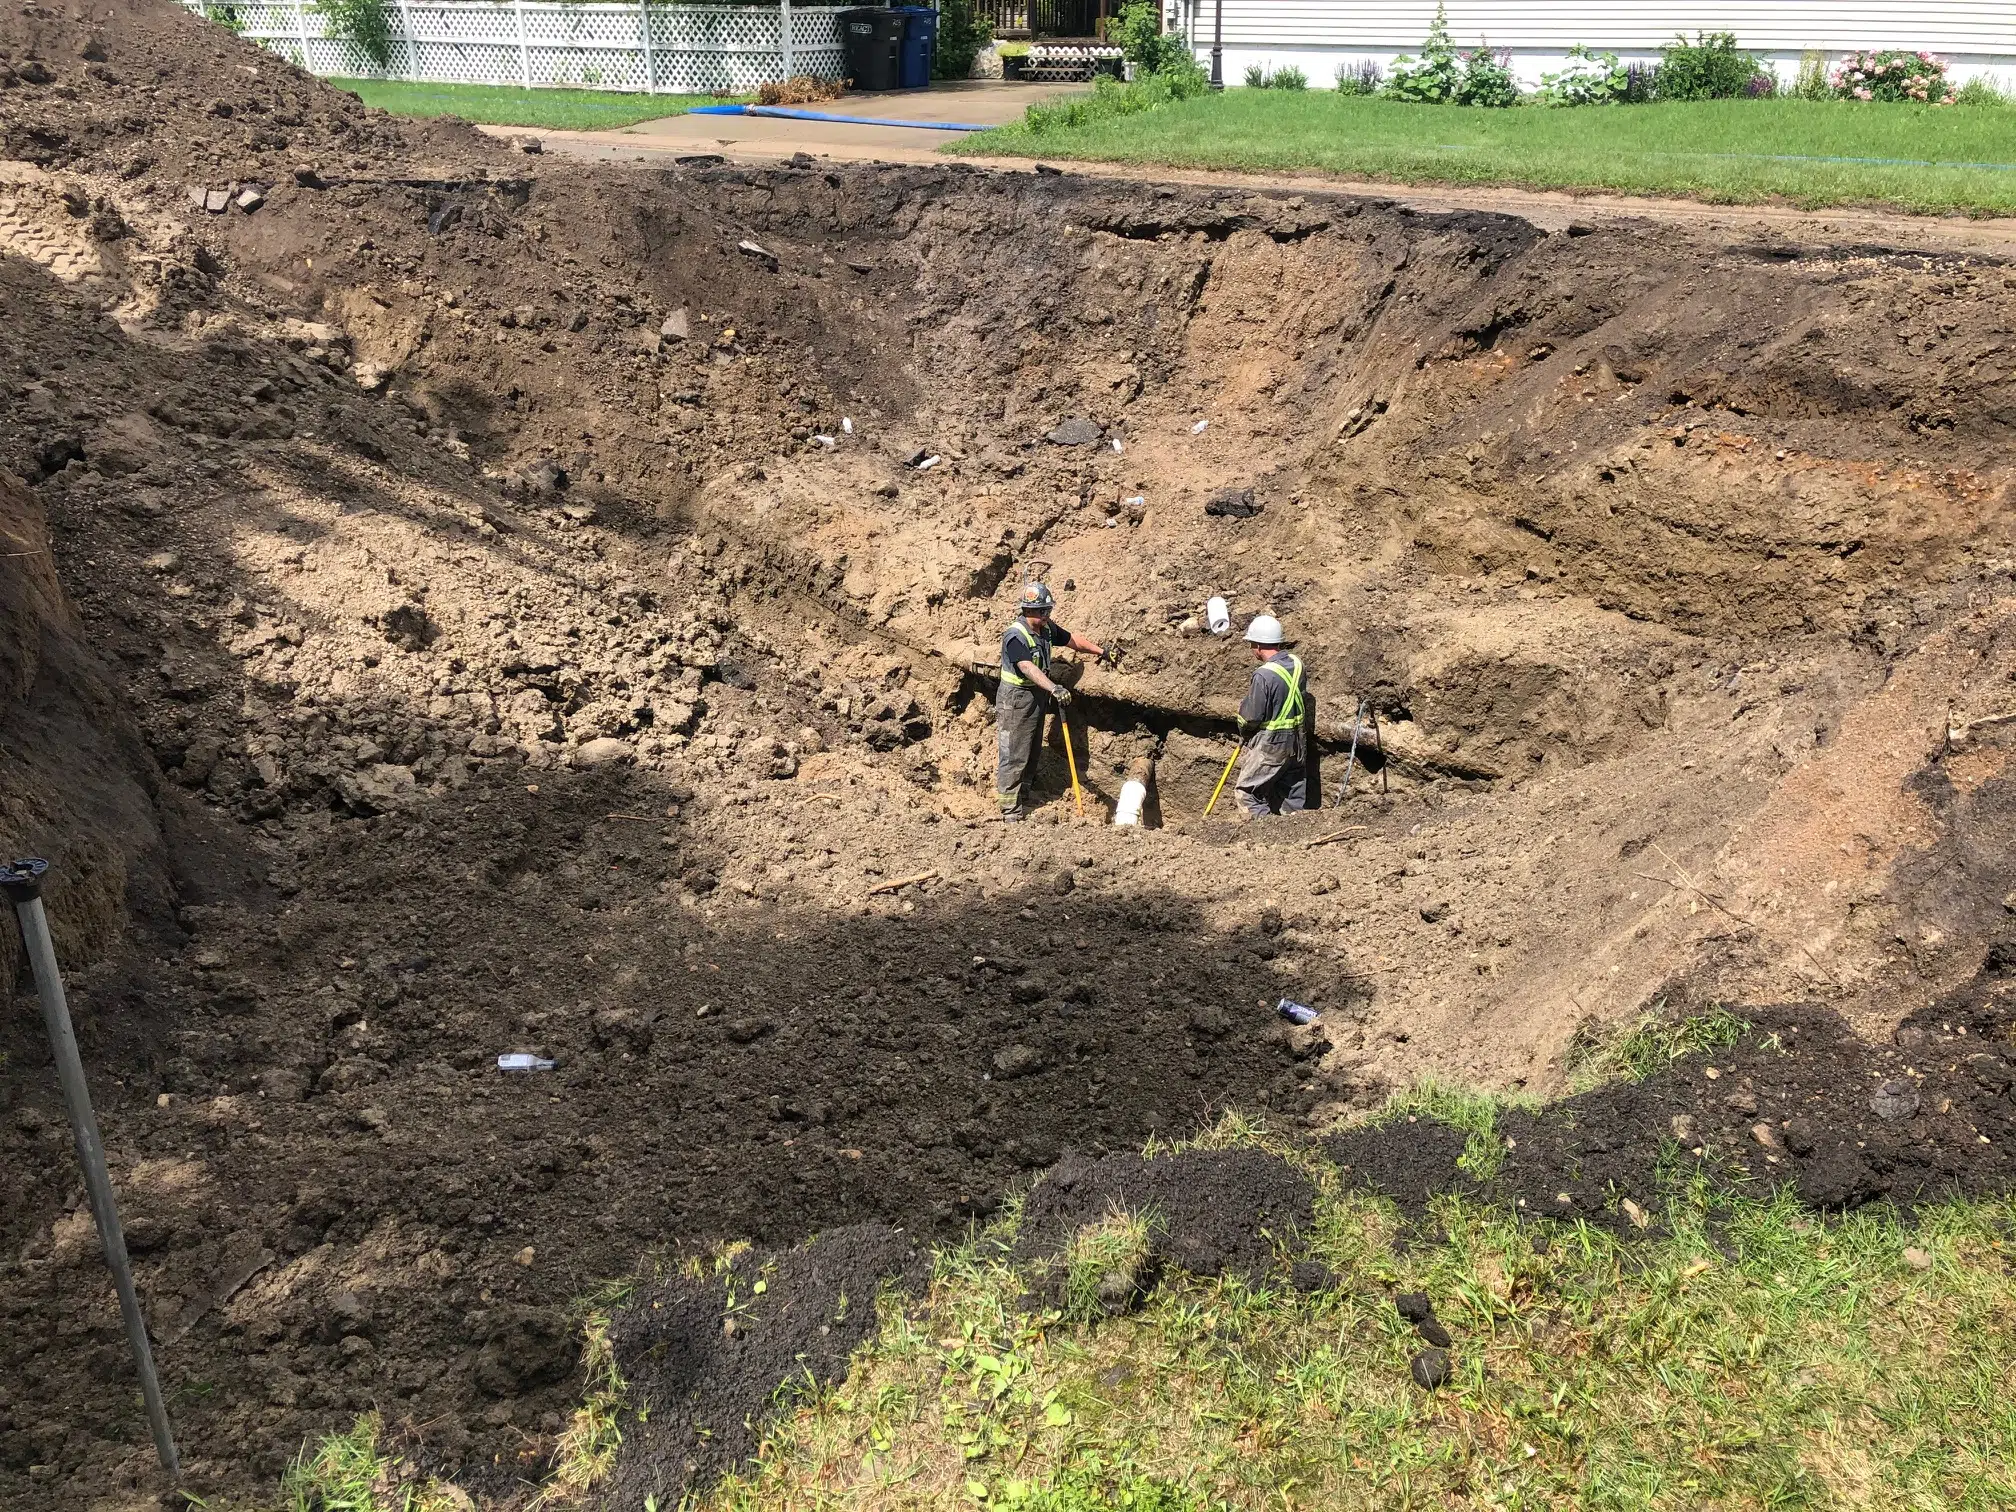 'I've never seen a gully washer like that ever:' Humboldt resident after sewer line burst